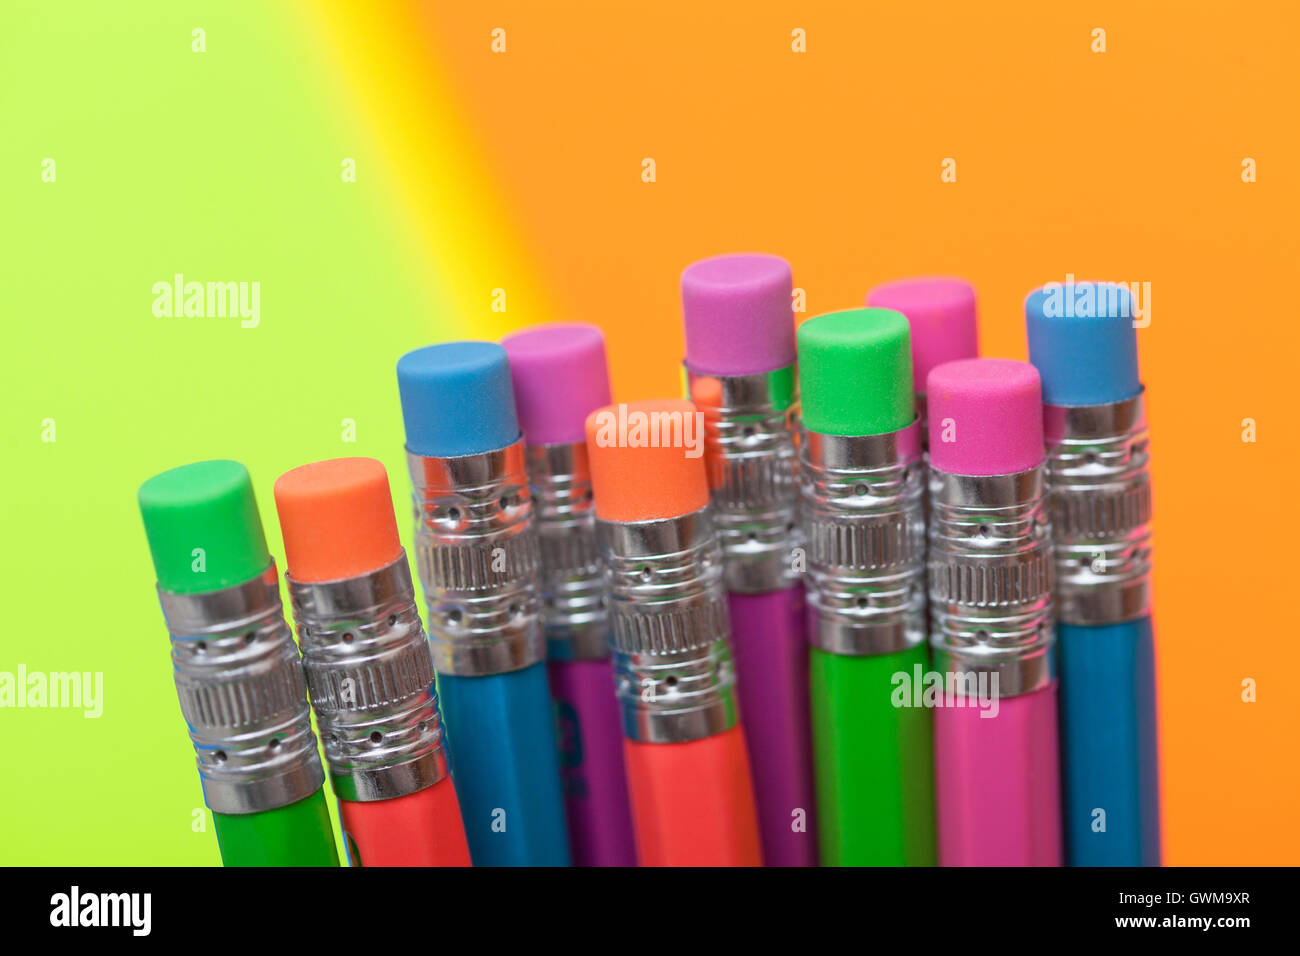 Colorful pencils against a background of colorful poster board Stock Photo